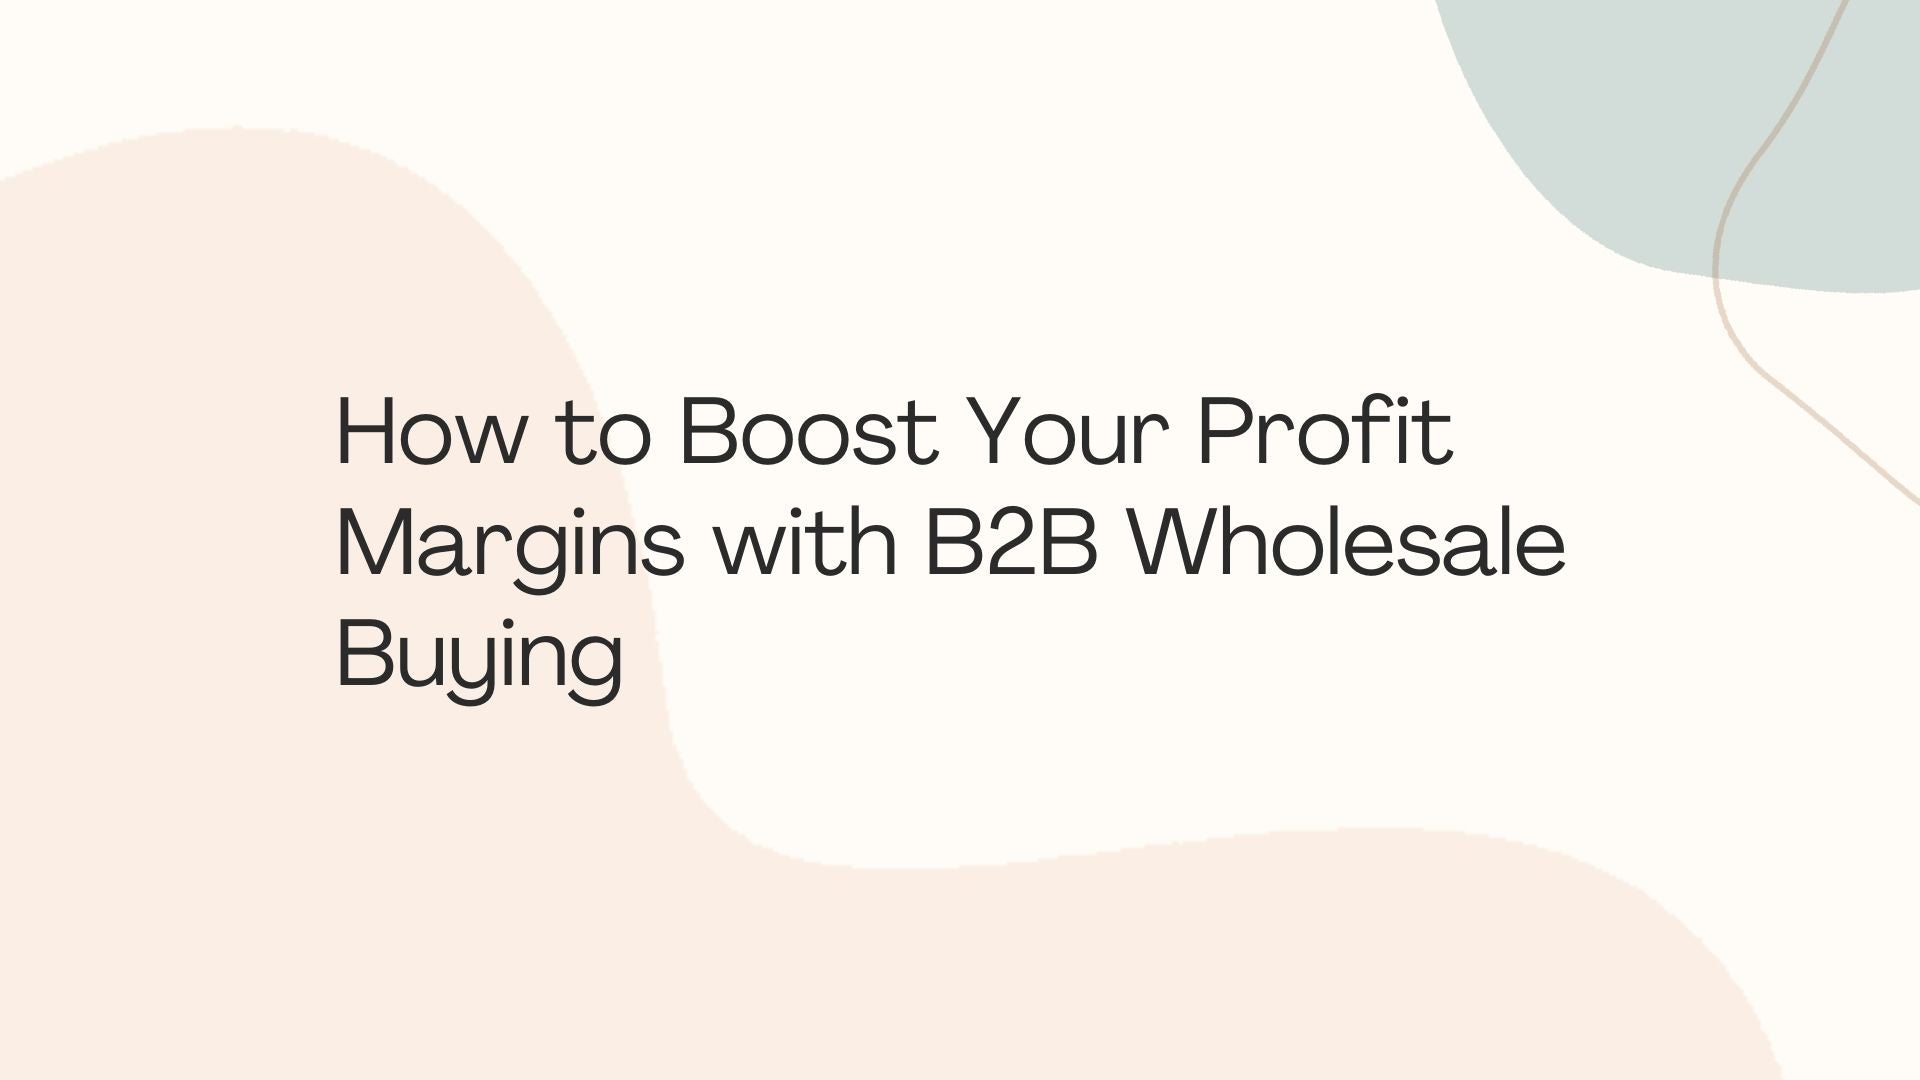 How to Boost Your Profit Margins with B2B Wholesale Buying